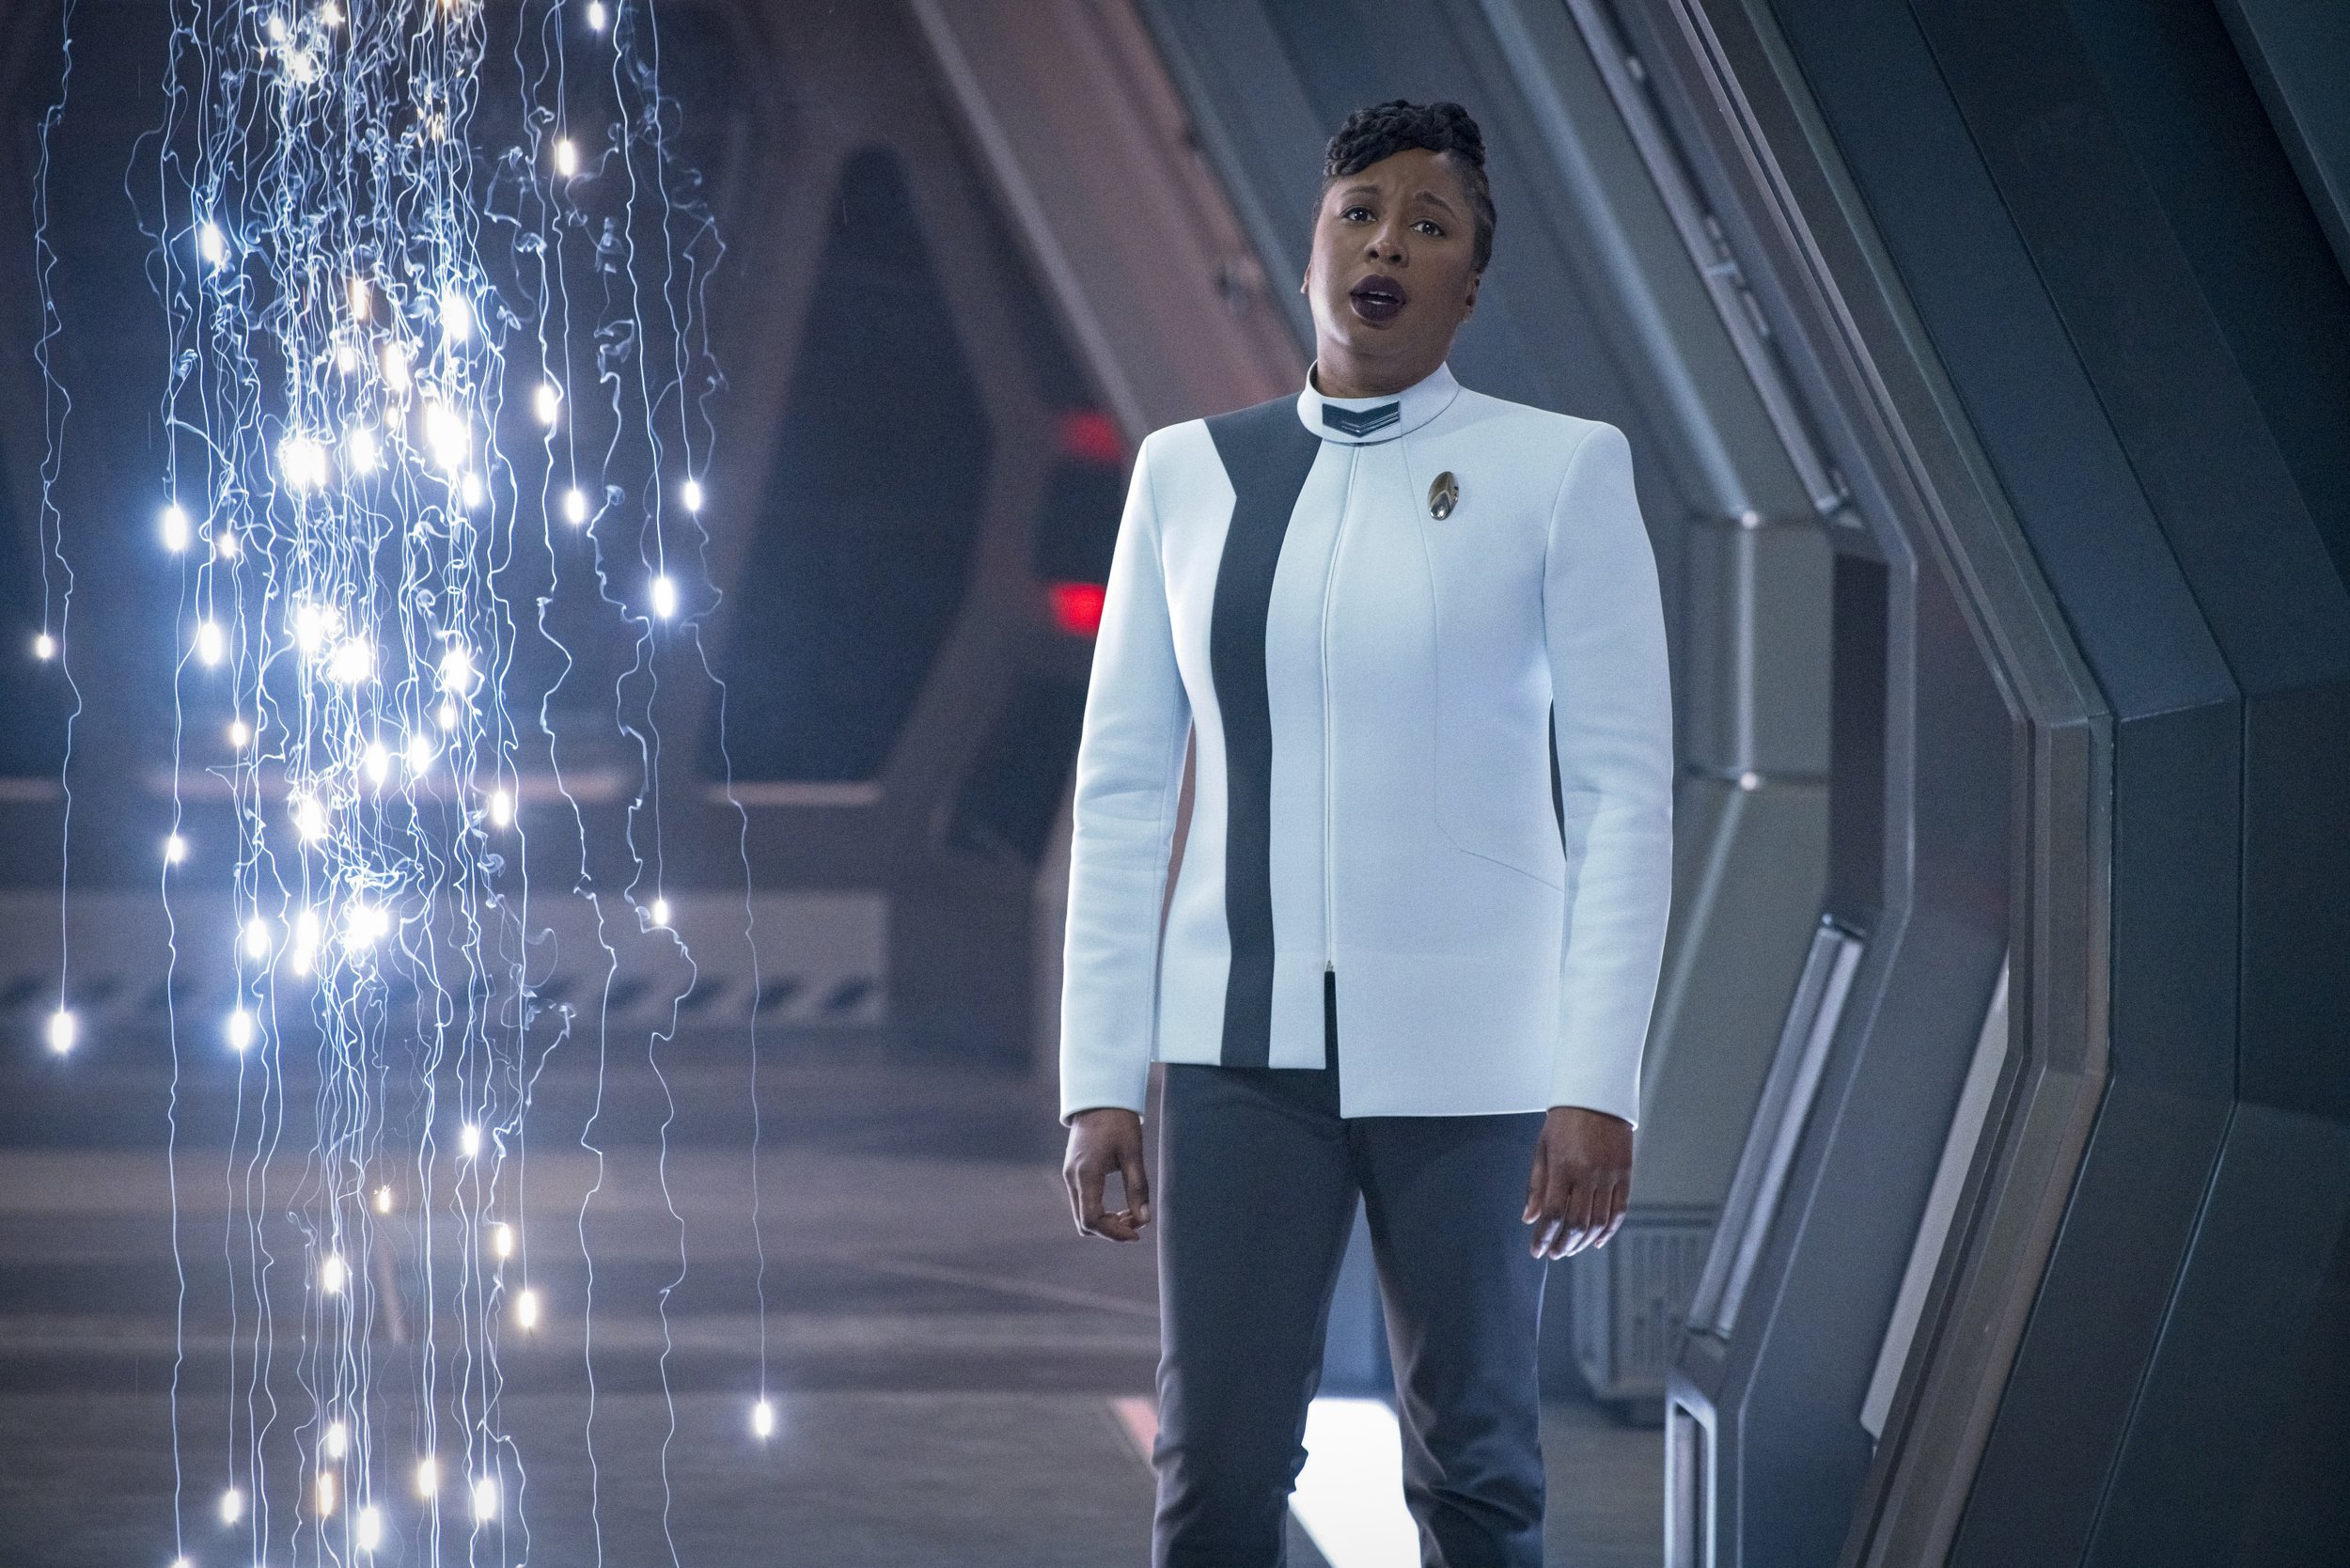   Pictured: Raven Dauda as Dr. Tracy Pollard of the Paramount+ original series STAR TREK: DISCOVERY. Photo Cr: Michael Gibson/Paramount+ (C) 2021 CBS Interactive. All Rights Reserved.  